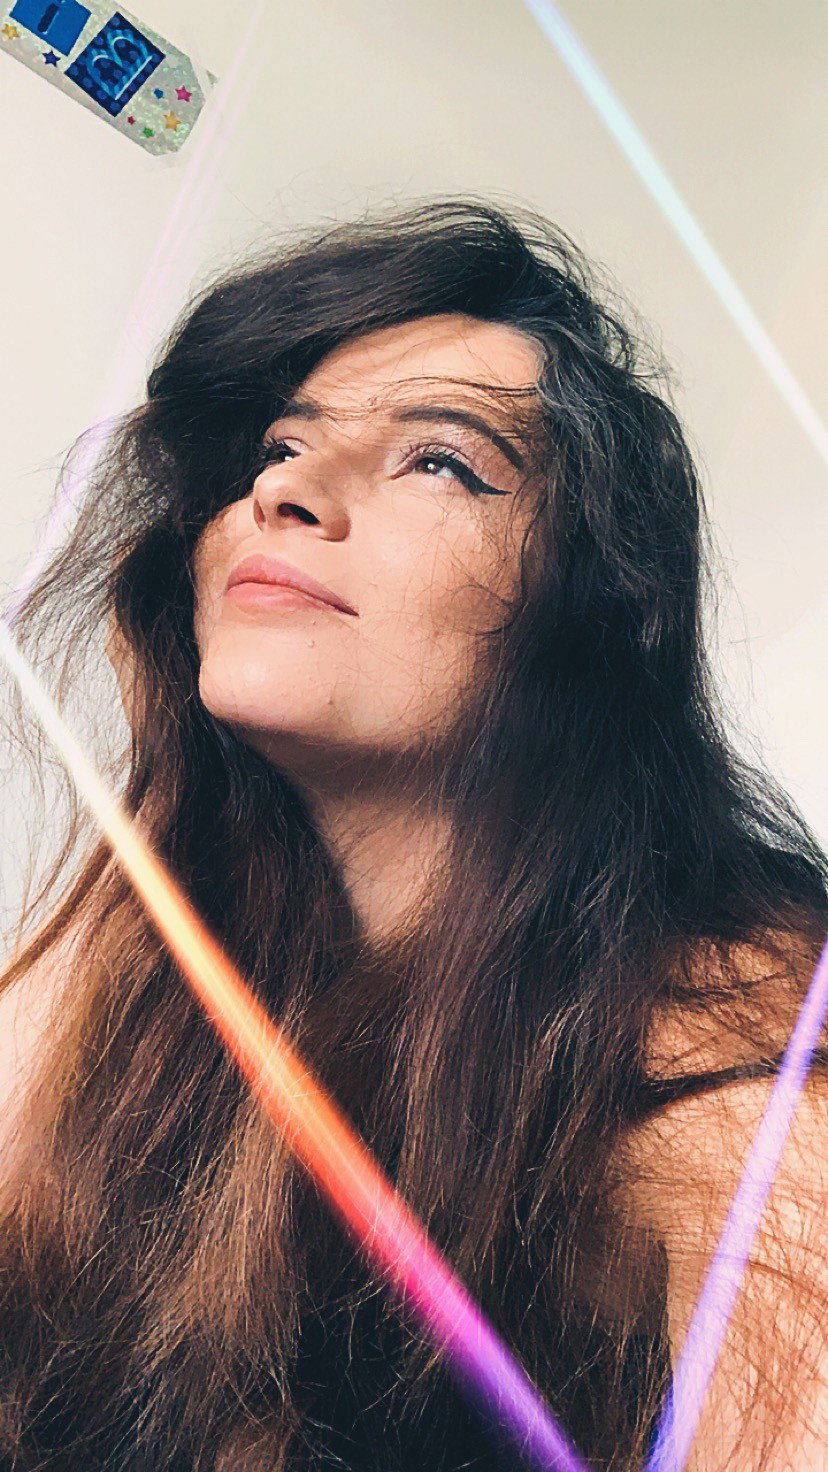 Watch the Photo by TamTam with the username @TamTam, who is a star user, posted on September 10, 2019. The post is about the topic Beautiful Girls. and the text says '#Beauty is a state of mind ! 
#sharesomelove
#portrait 
#glow
#sunny
#soul
#mondayweek'